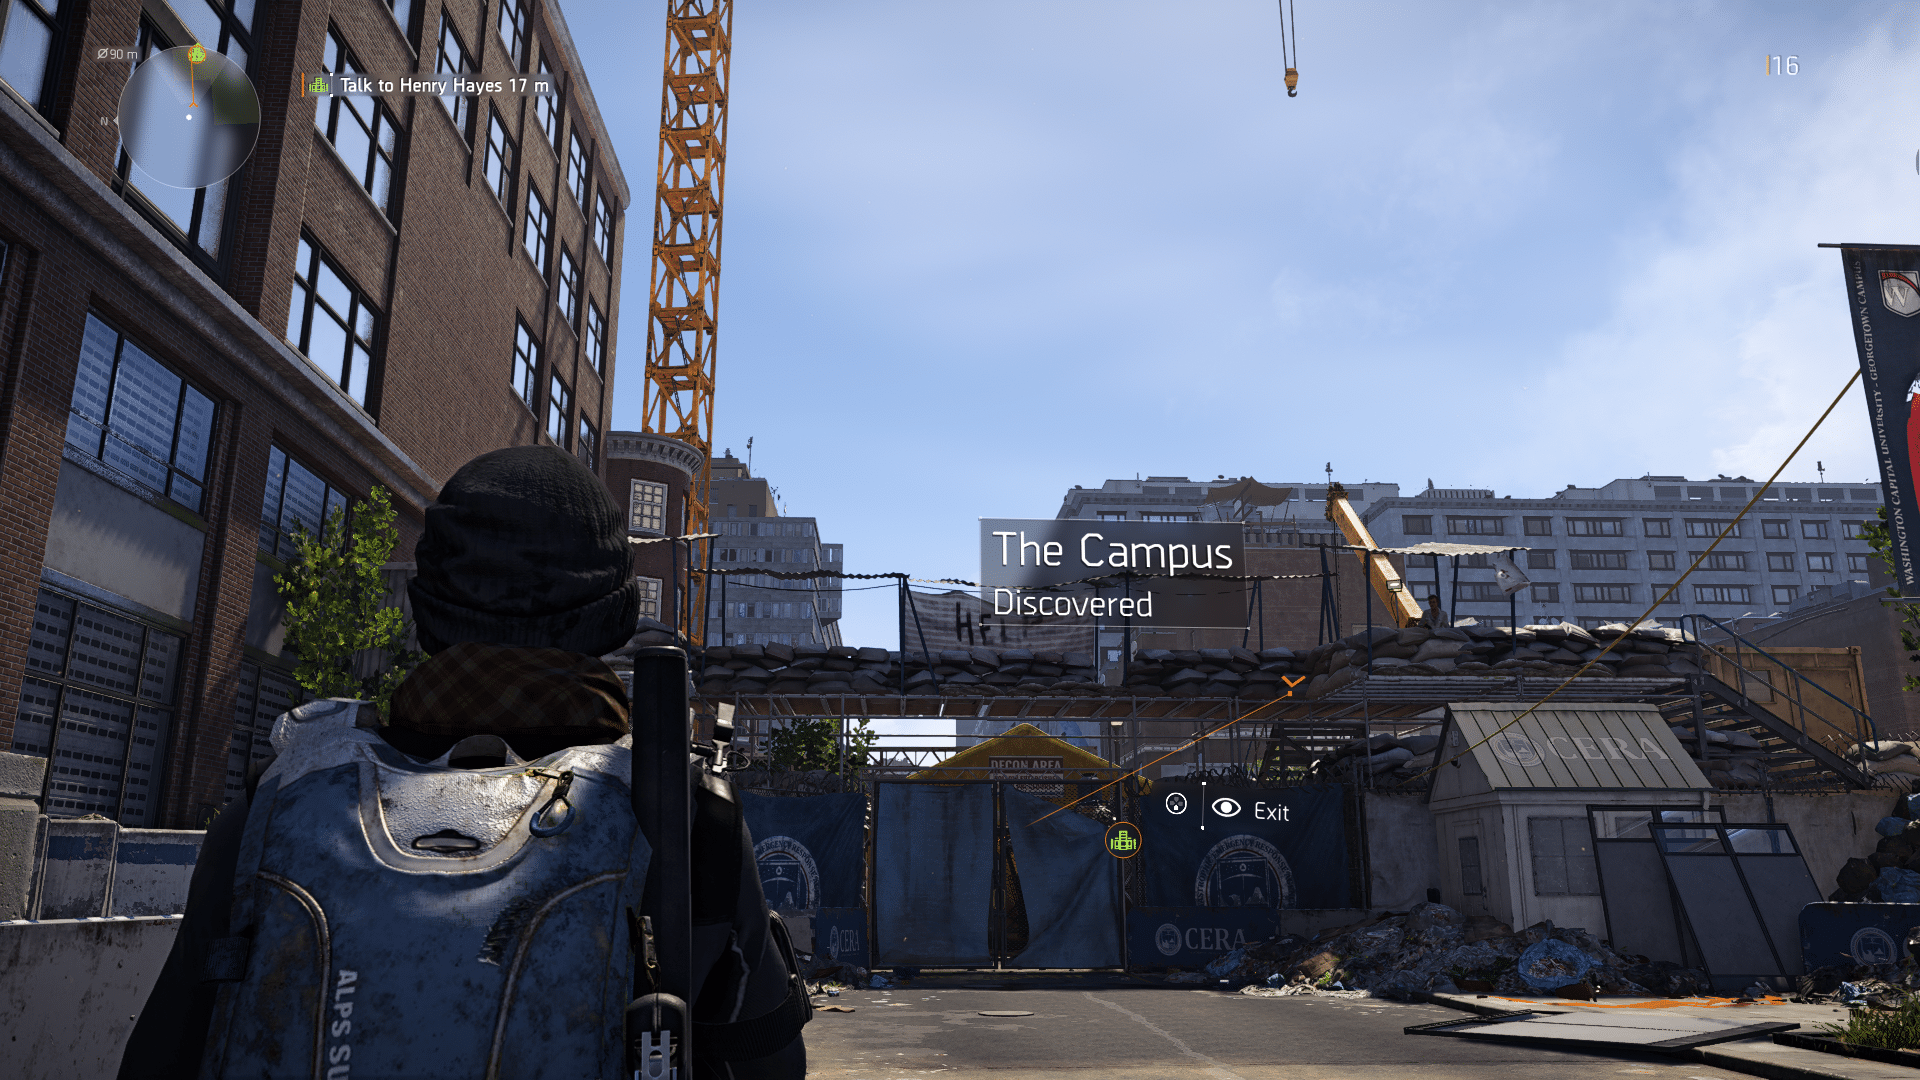 TheDivision2 4 7 2019 9 58 55 PM 680